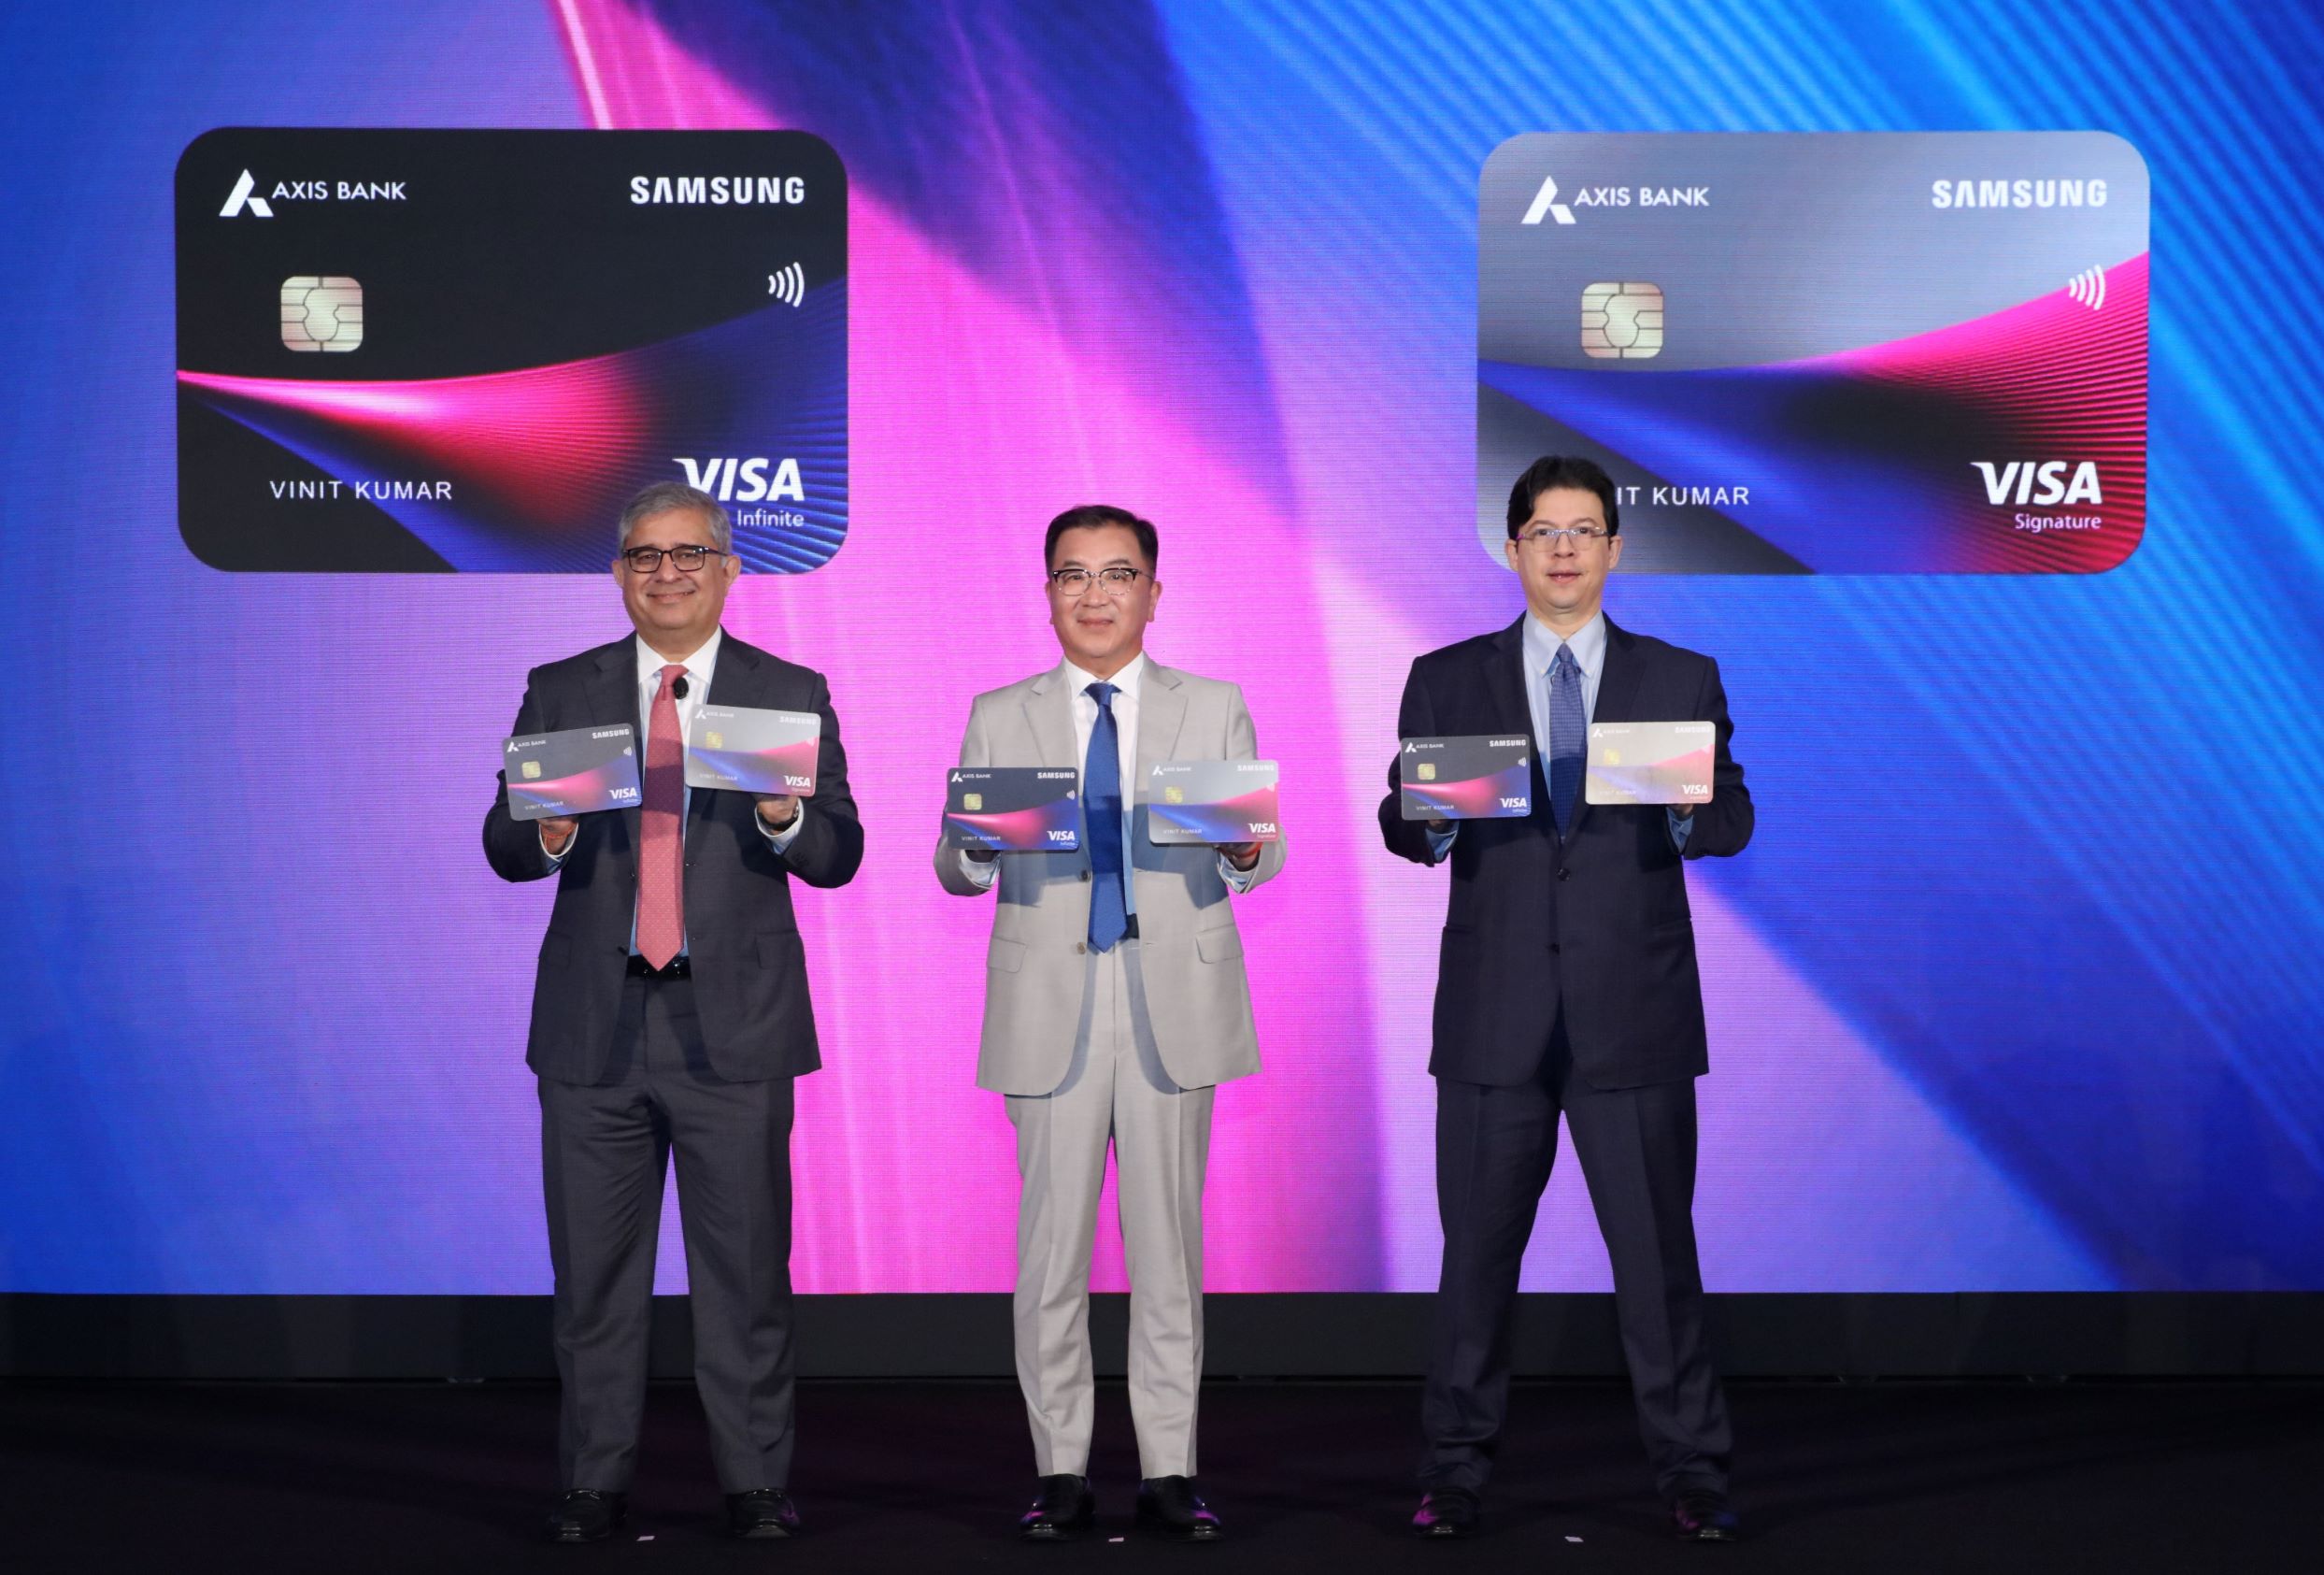 Samsung’s cobranded cards with Axis Bank could make it the market leader again by 1Q’23